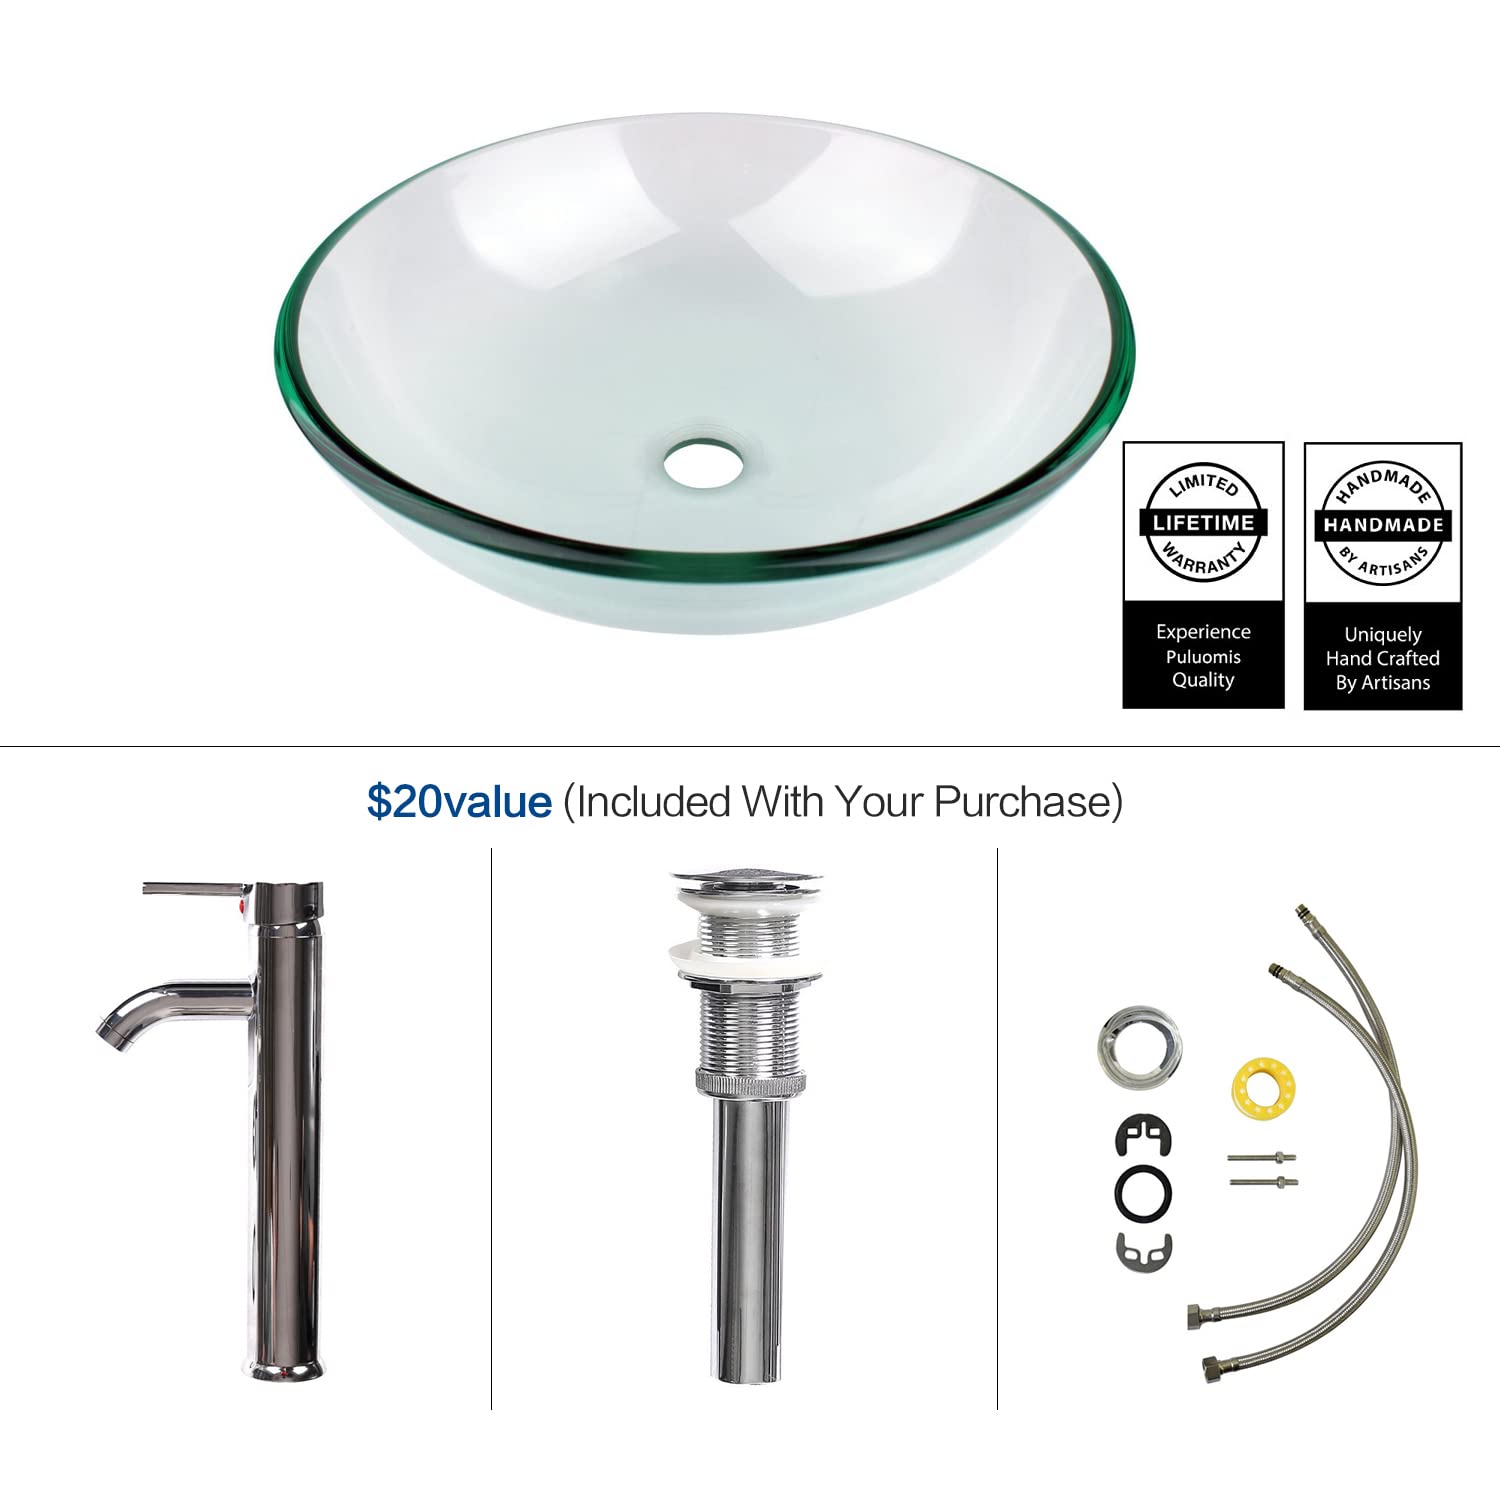 Elecwish glossy glass sink included parts